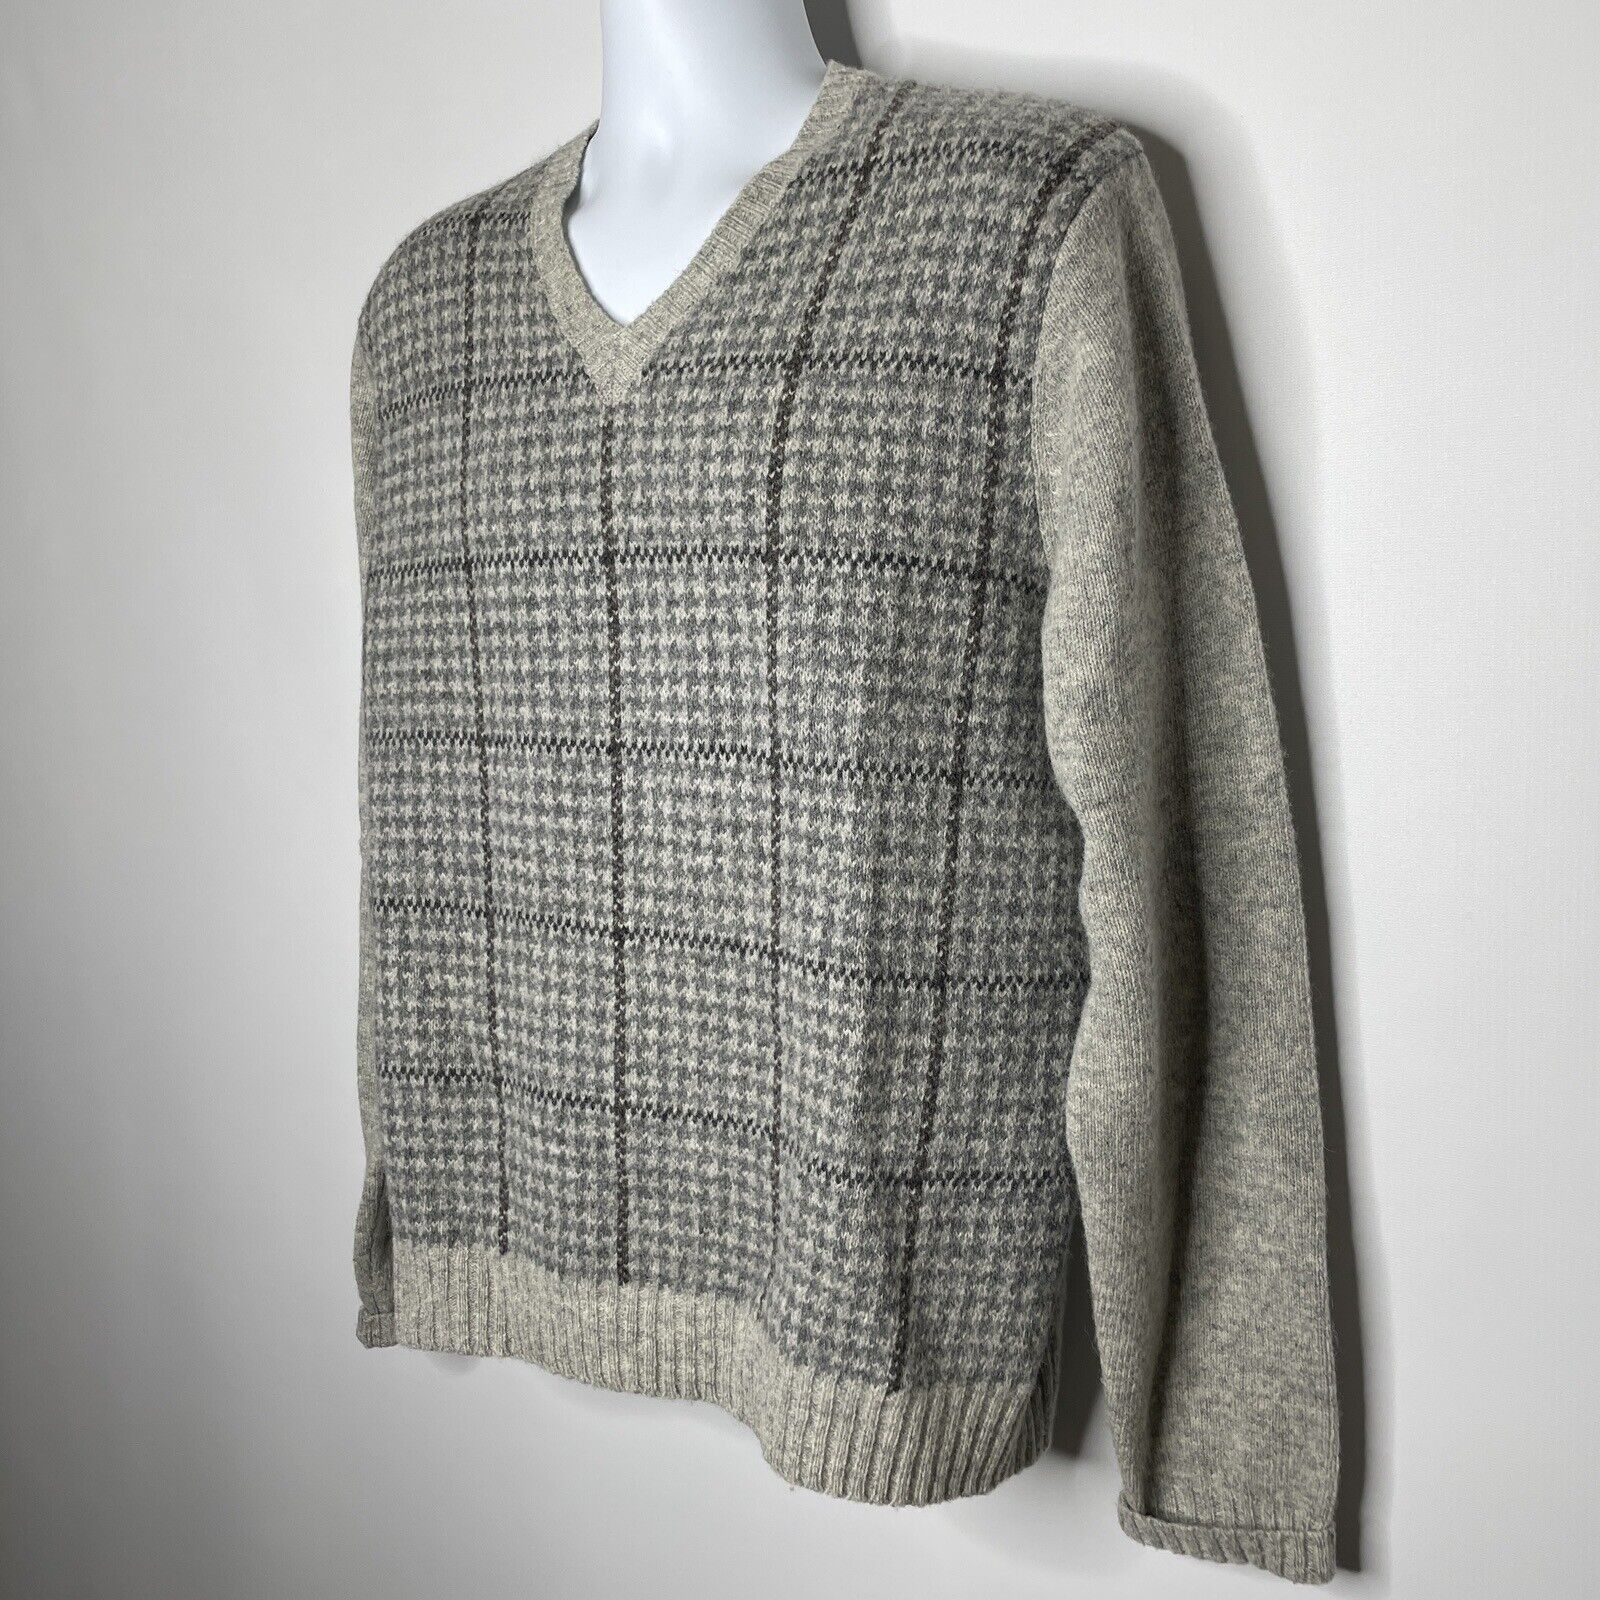 Vintage 80s Gray Shetland Wool Houndstooth Plaid Pullover Sweater Size US L / EU 52-54 / 3 - 7 Thumbnail